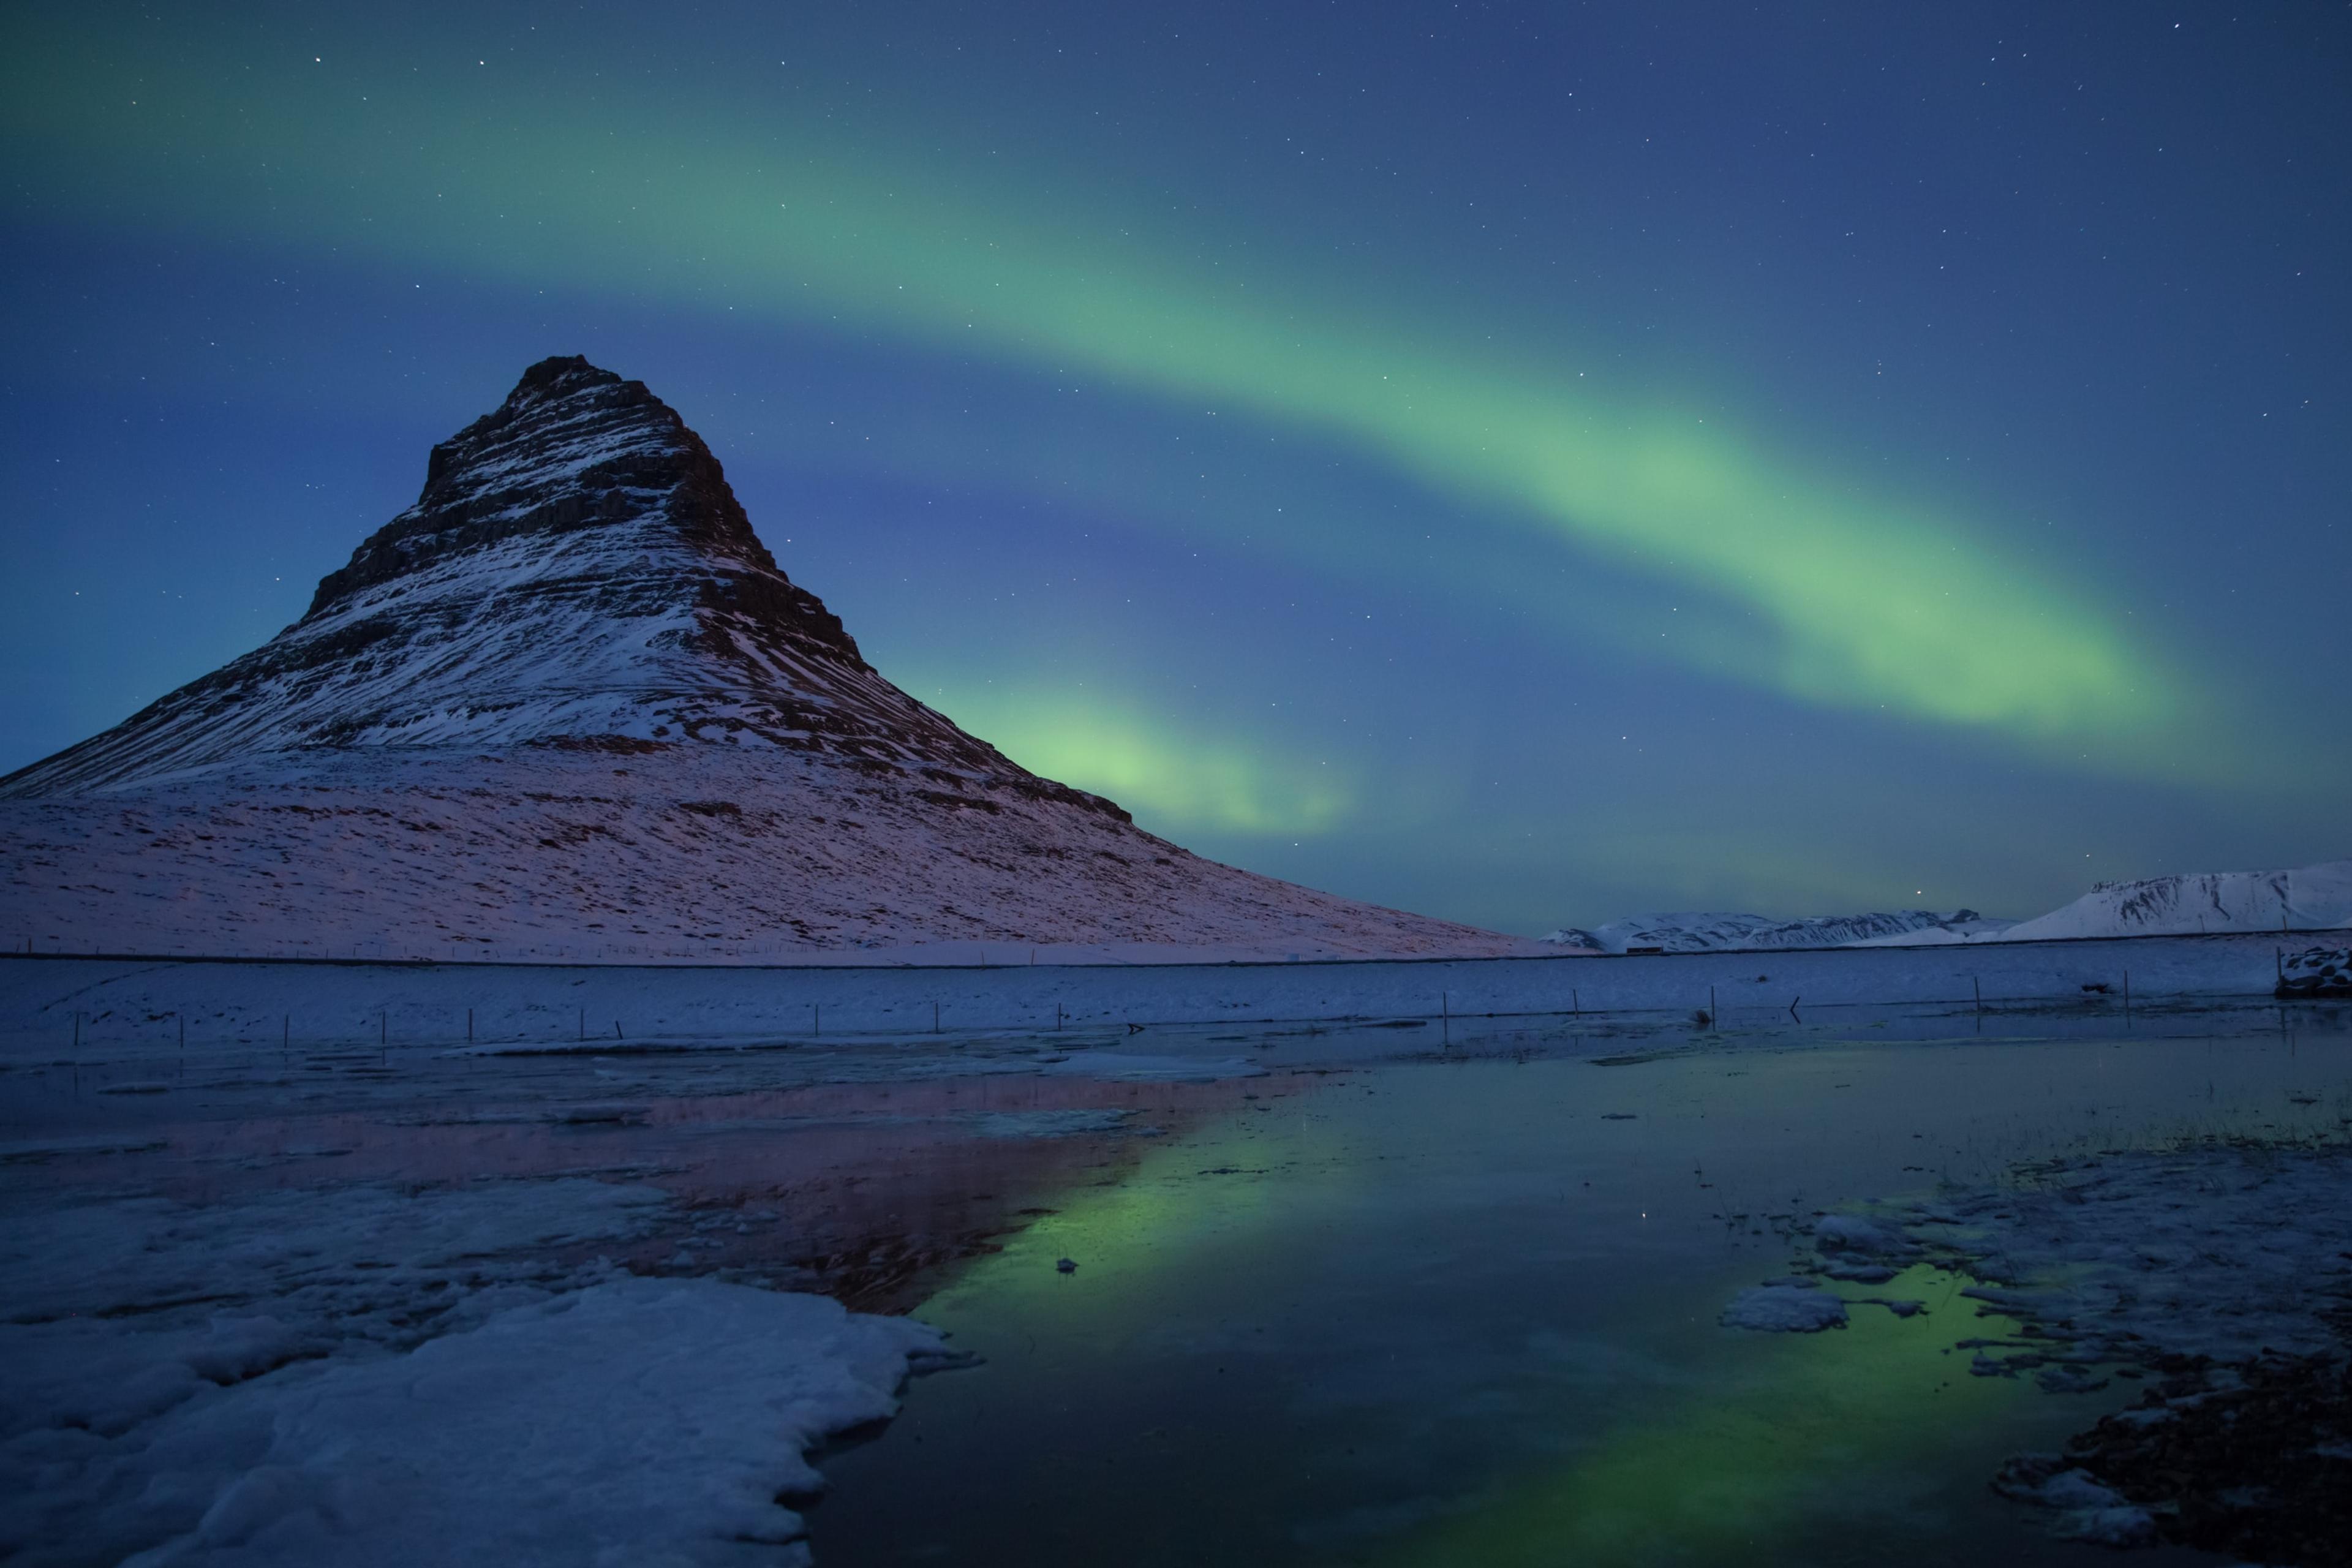 The Northern Lights arcing over Kirkjufell mountain and its reflection in a nearby water body during winter twilight.